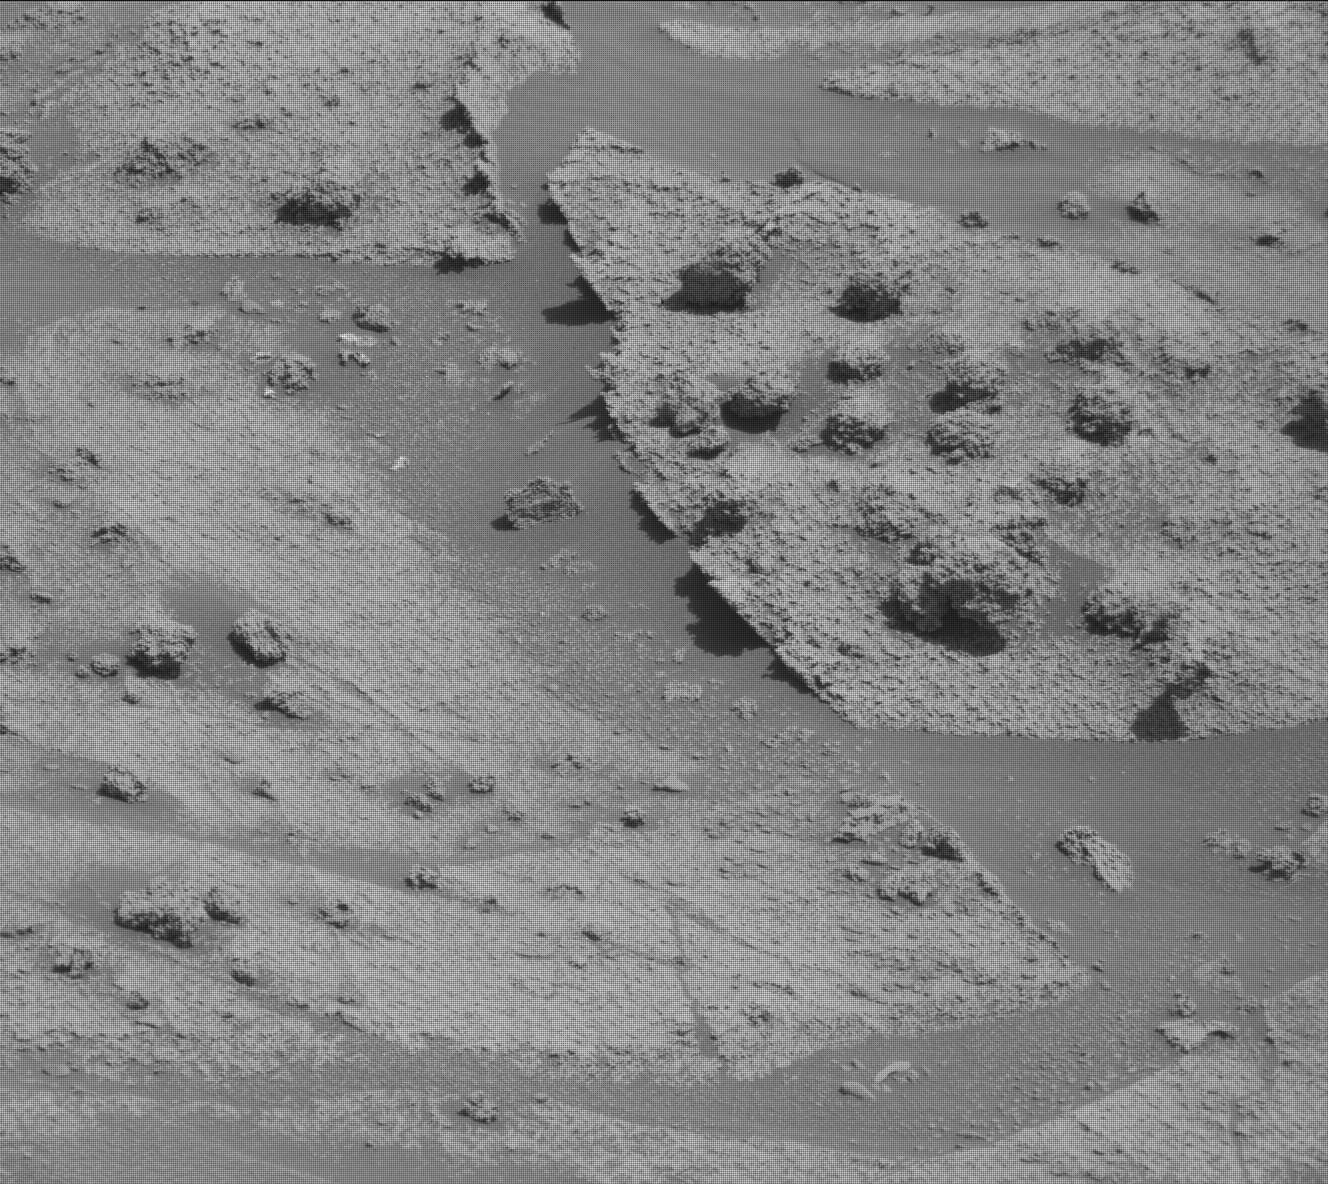 This is a black and white image of the rocky, sandy surface of Mars. The surface appears to be smooth and there are small chunks of rocks in places.